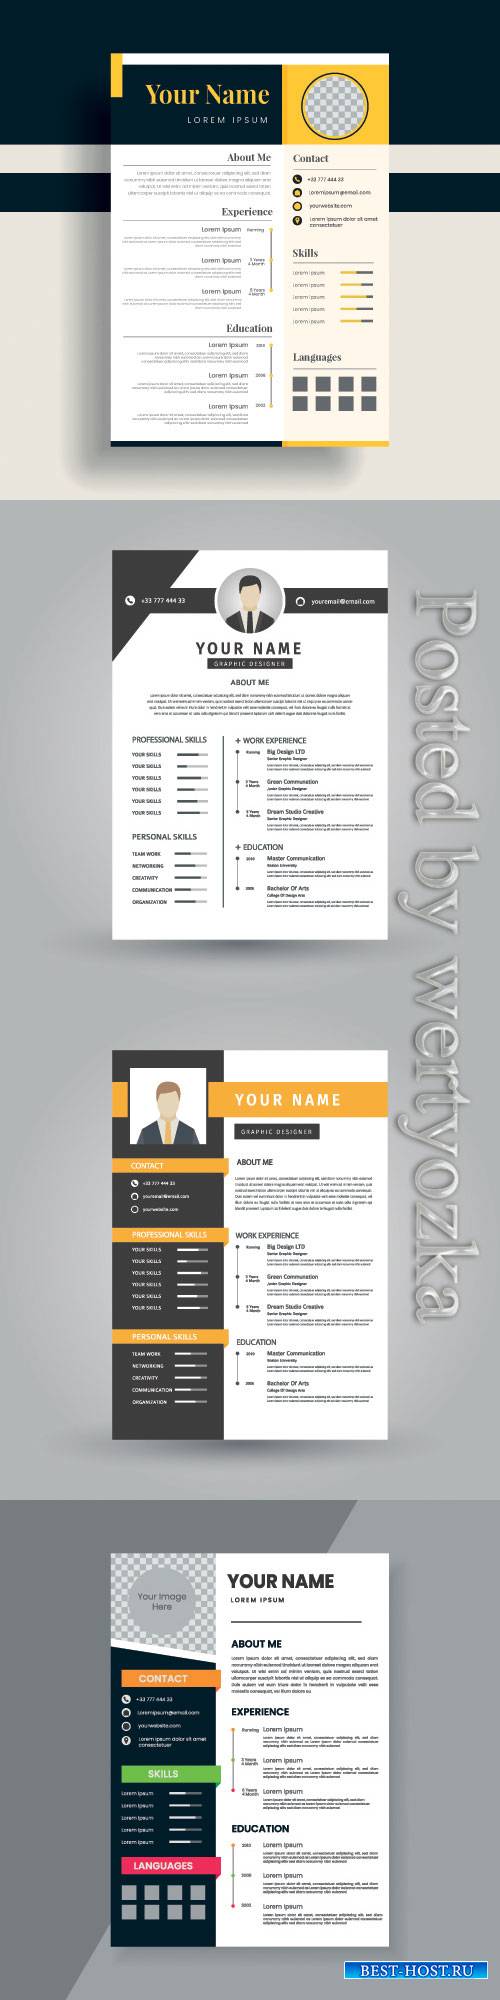 Resume vector template